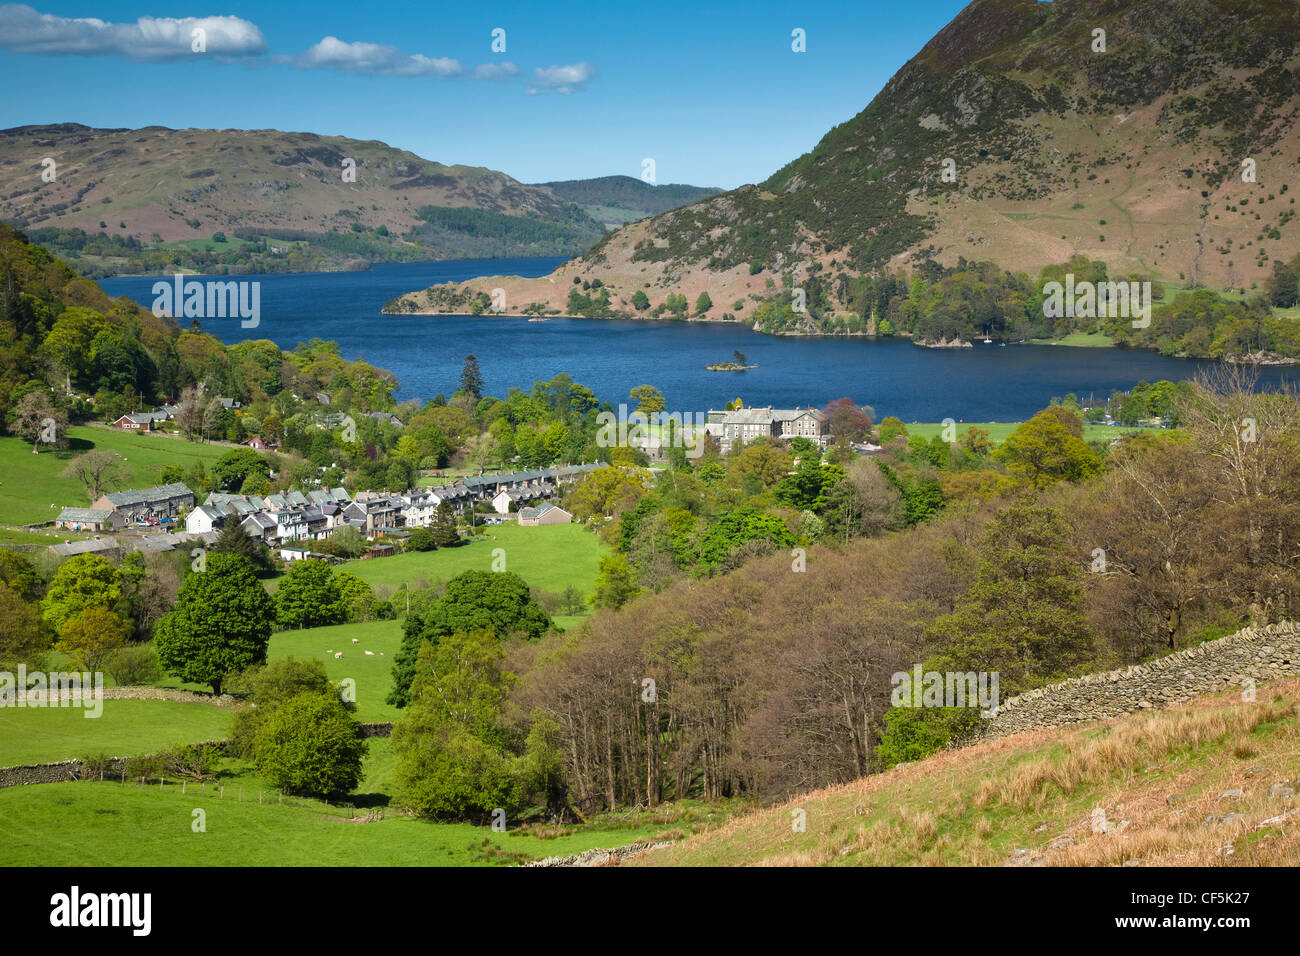 View over the village of Glenridding to Ullswater, the second largest lake in the Lake District. Stock Photo